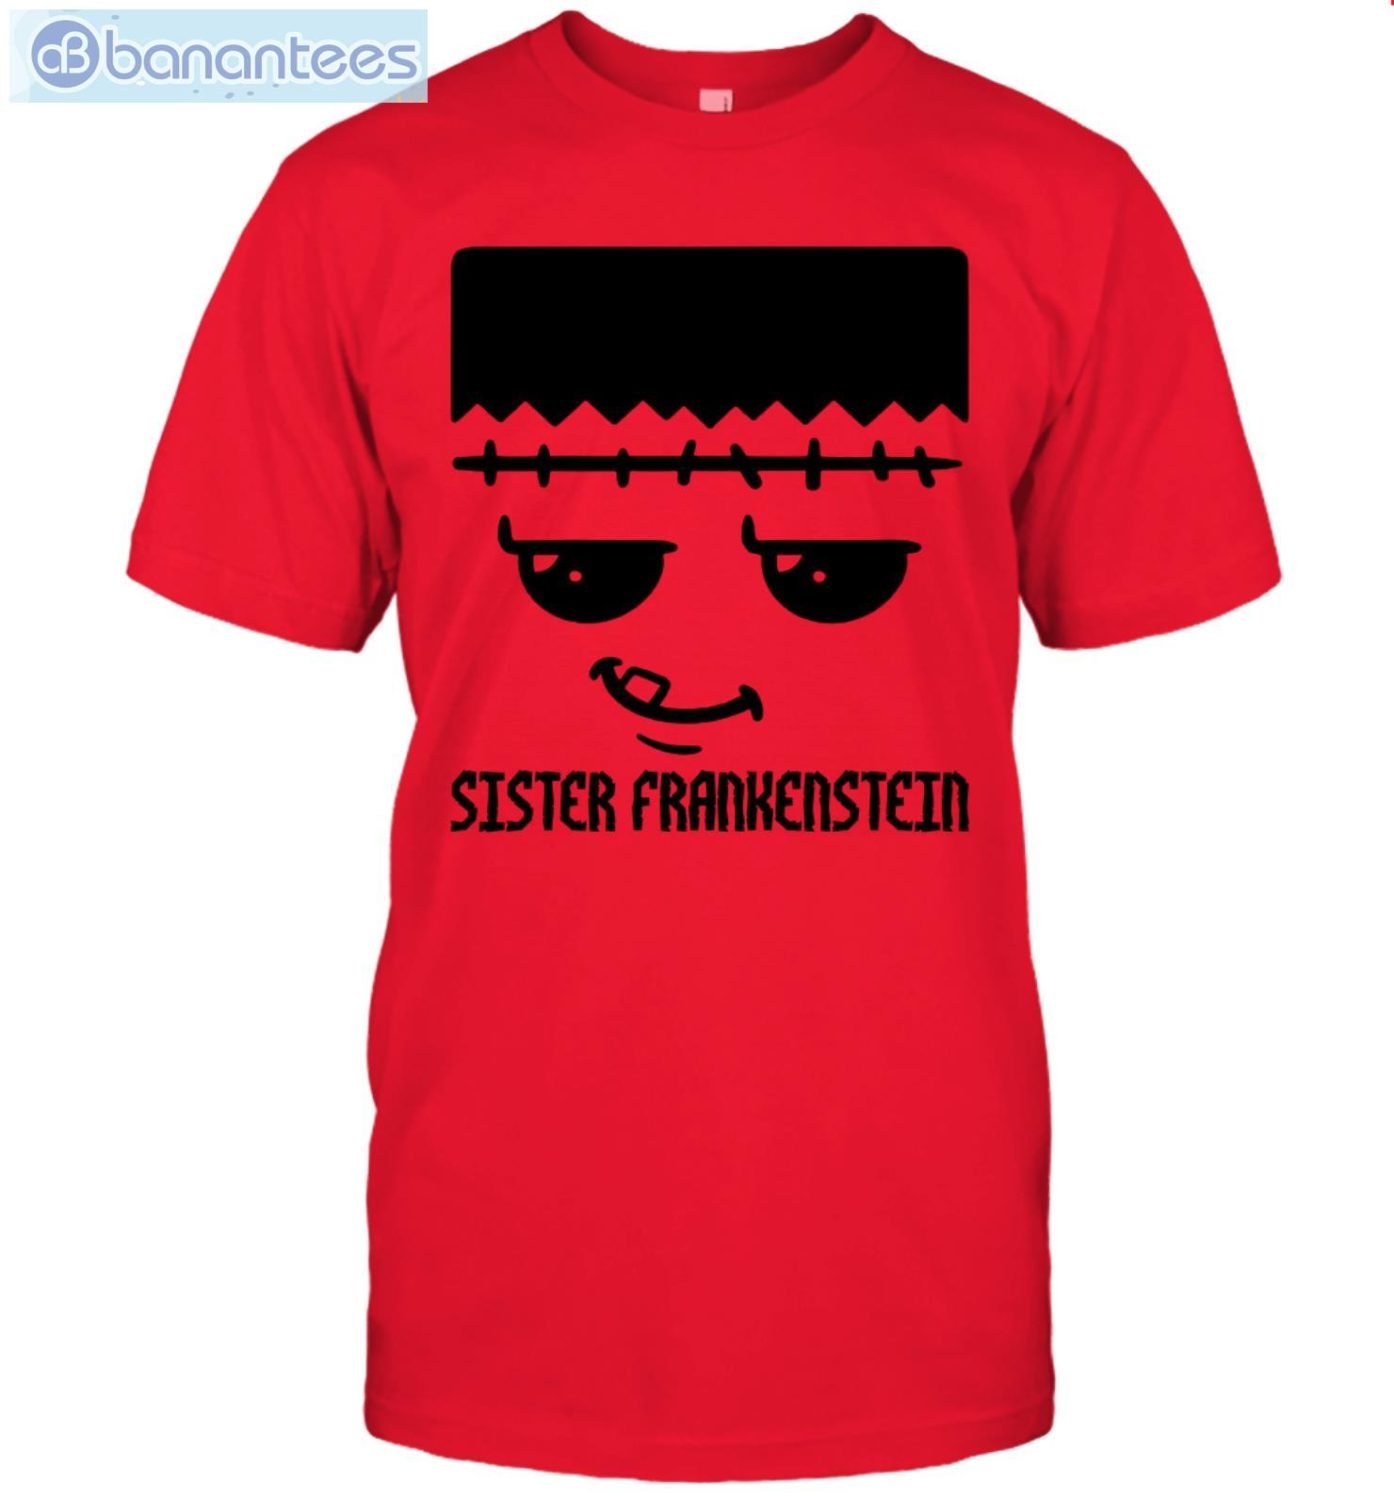 Frankenstein Family Halloween Sister T-Shirt Product Photo 3 Product photo 2